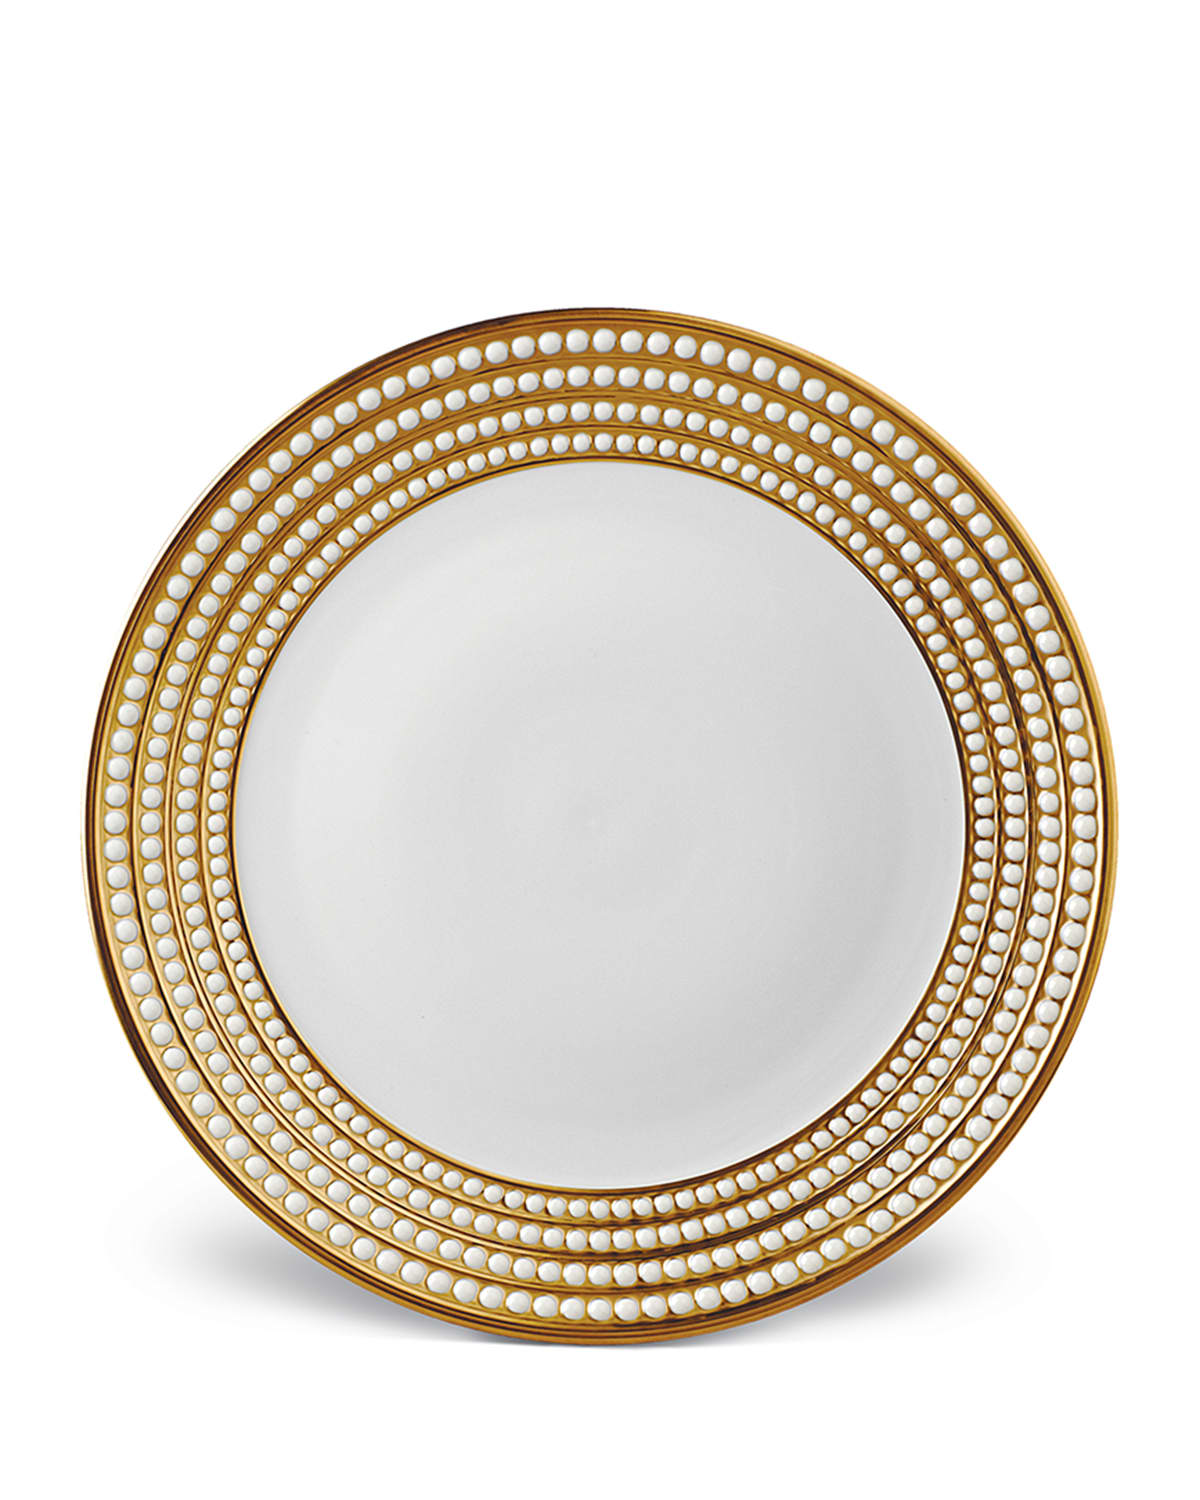 L'OBJET PERLEE GOLD CHARGER PLATE